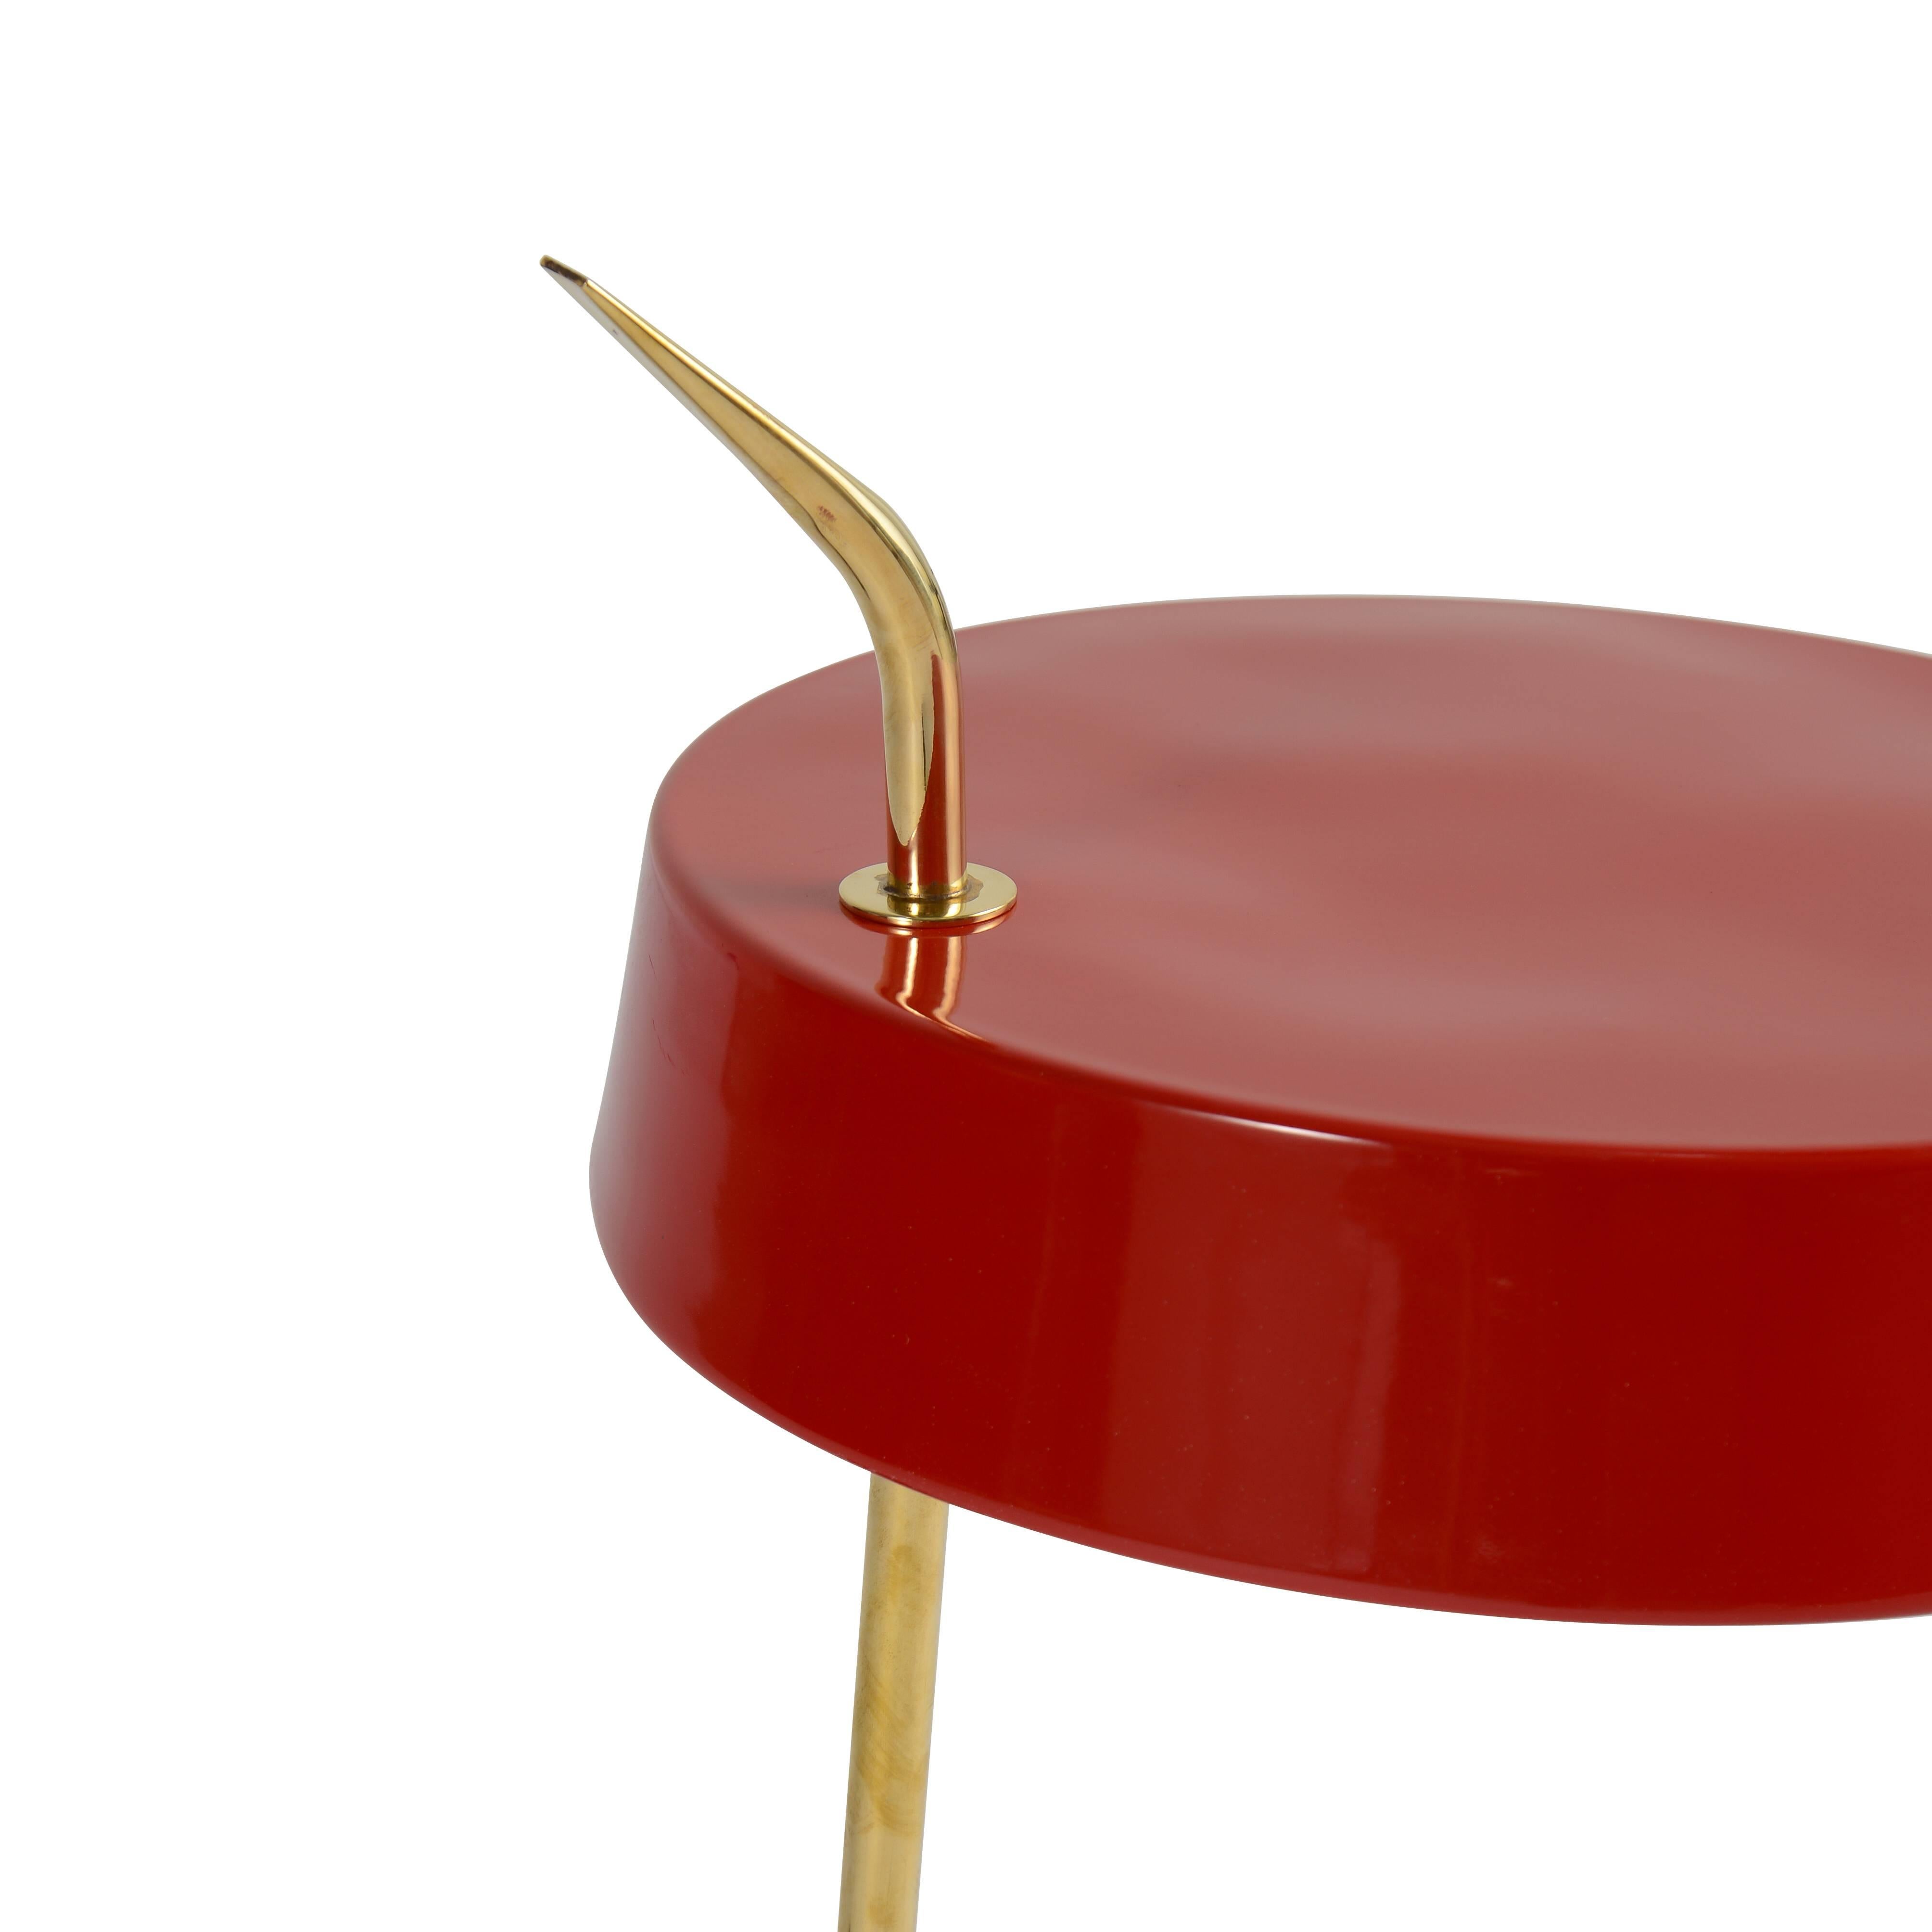 Red enameled desk lamp with brass fittings on marble base.